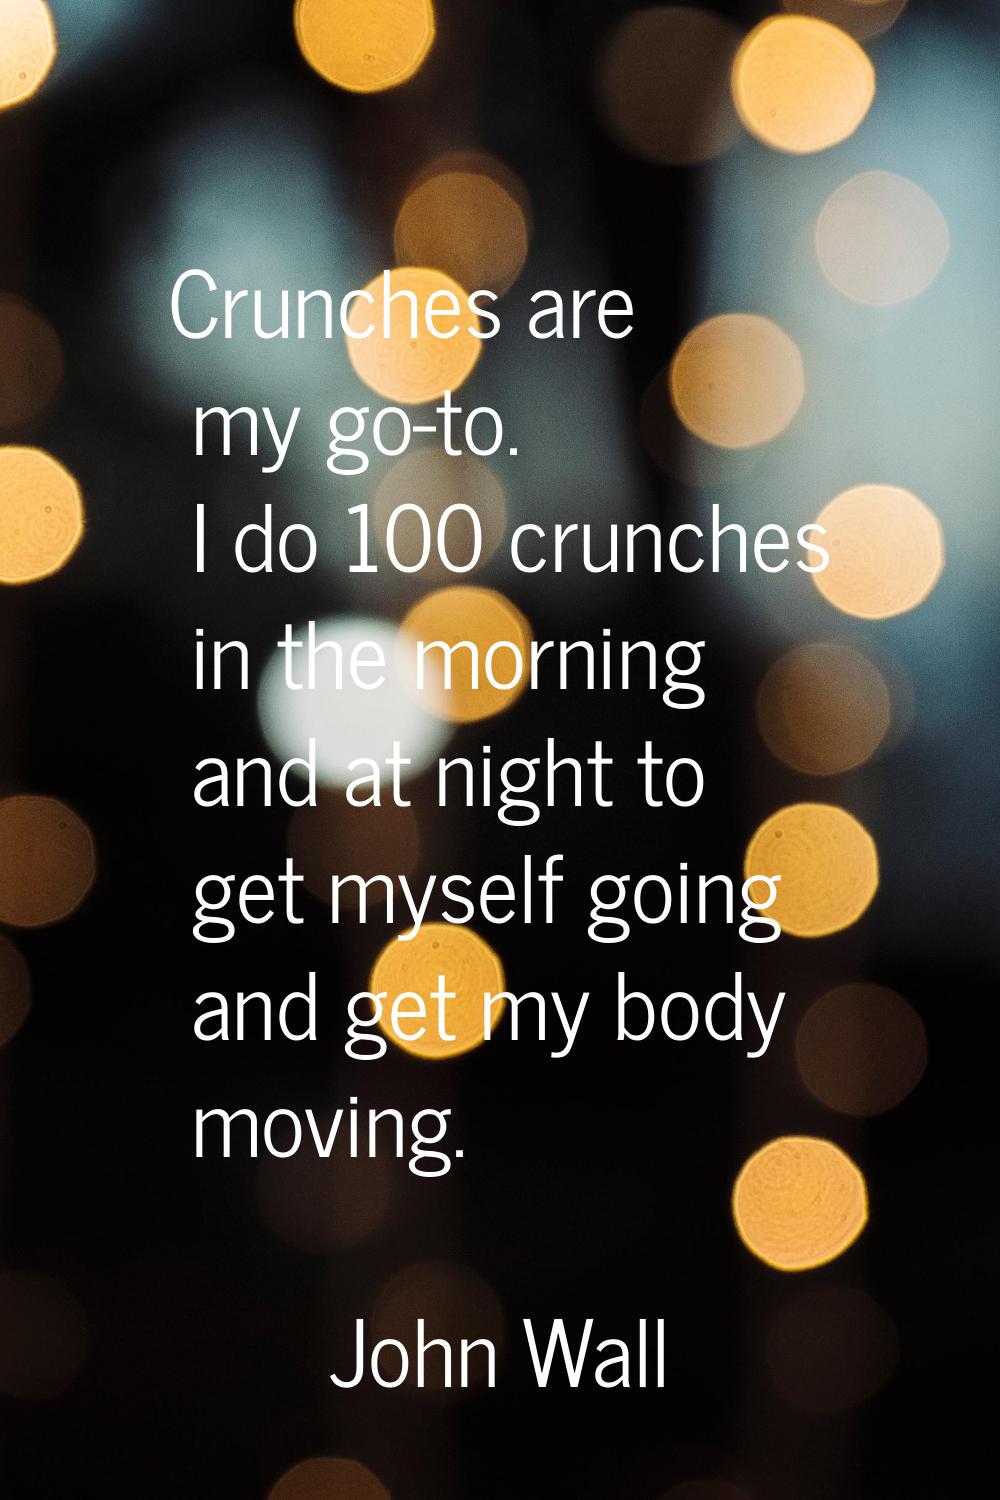 Crunches are my go-to. I do 100 crunches in the morning and at night to get myself going and get my